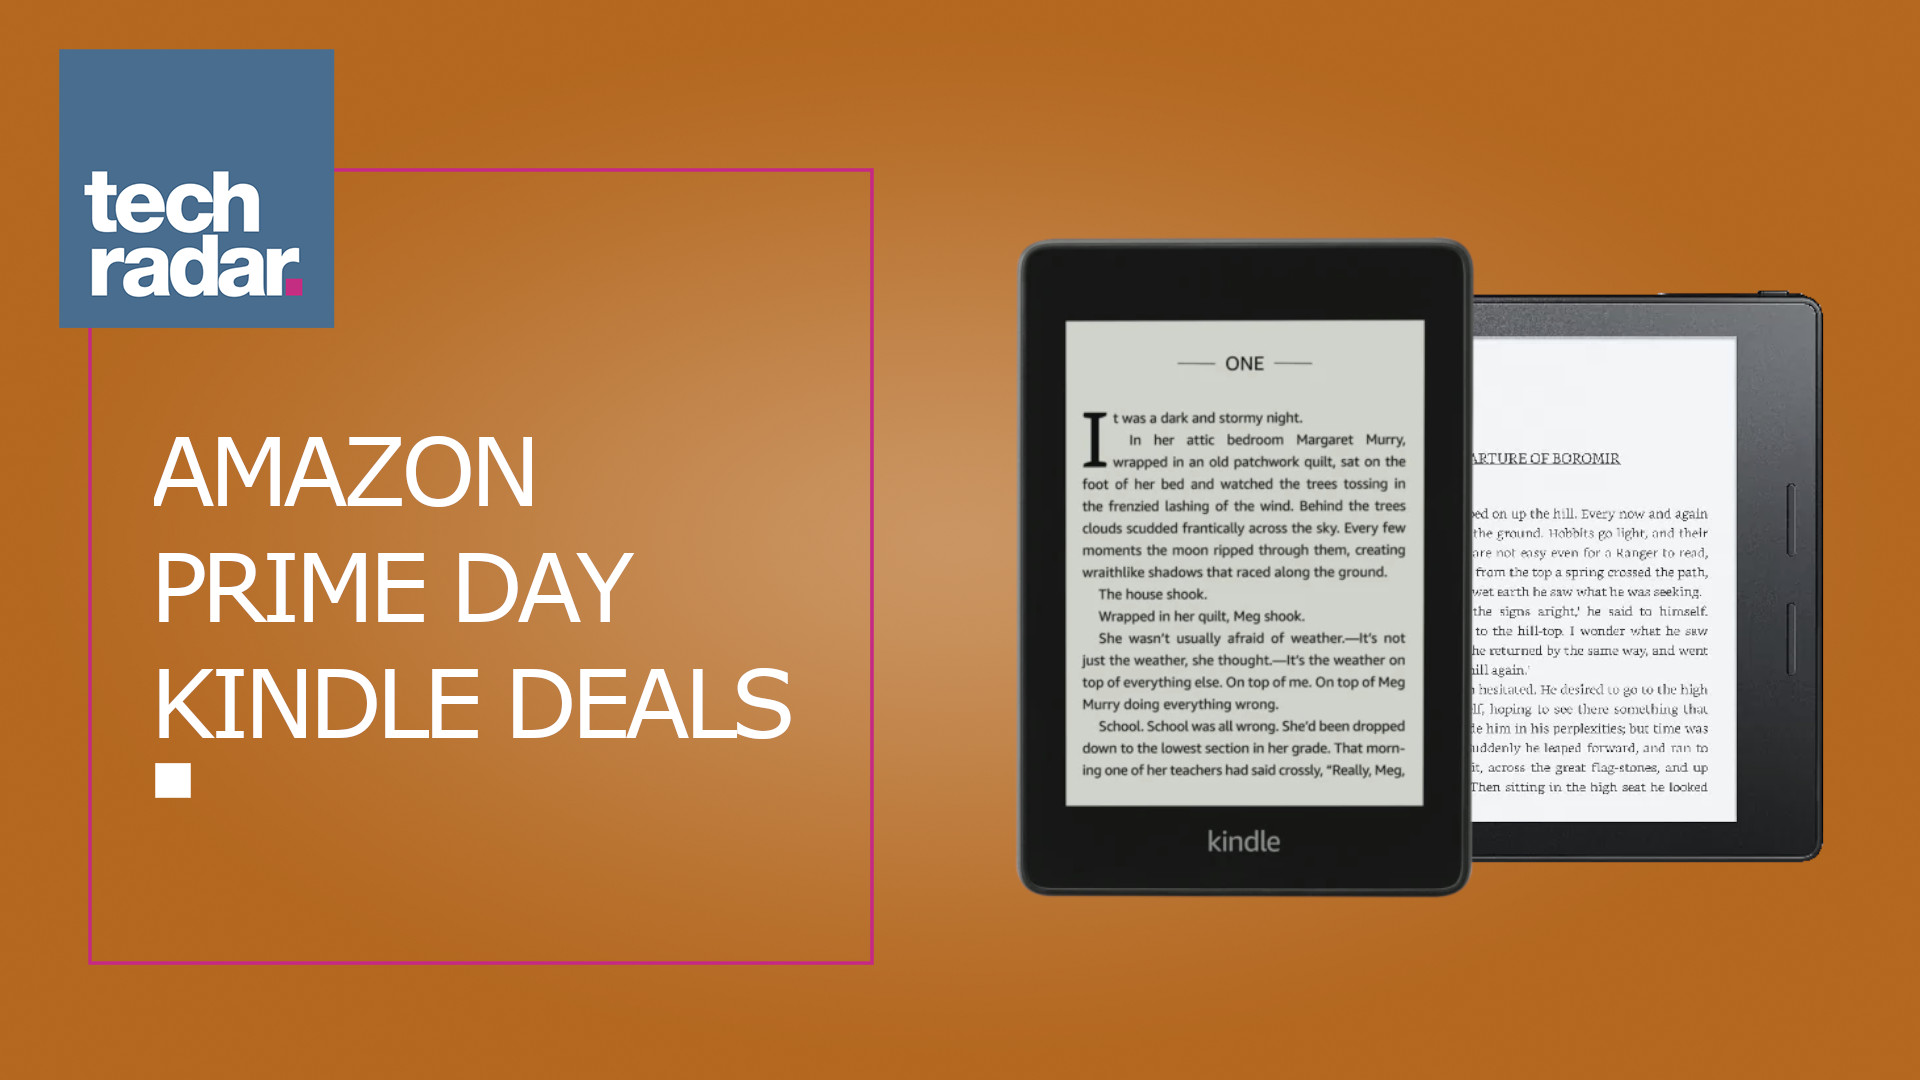 amazon-prime-day-kindle-deals-2021-prime-day-is-over-for-another-year